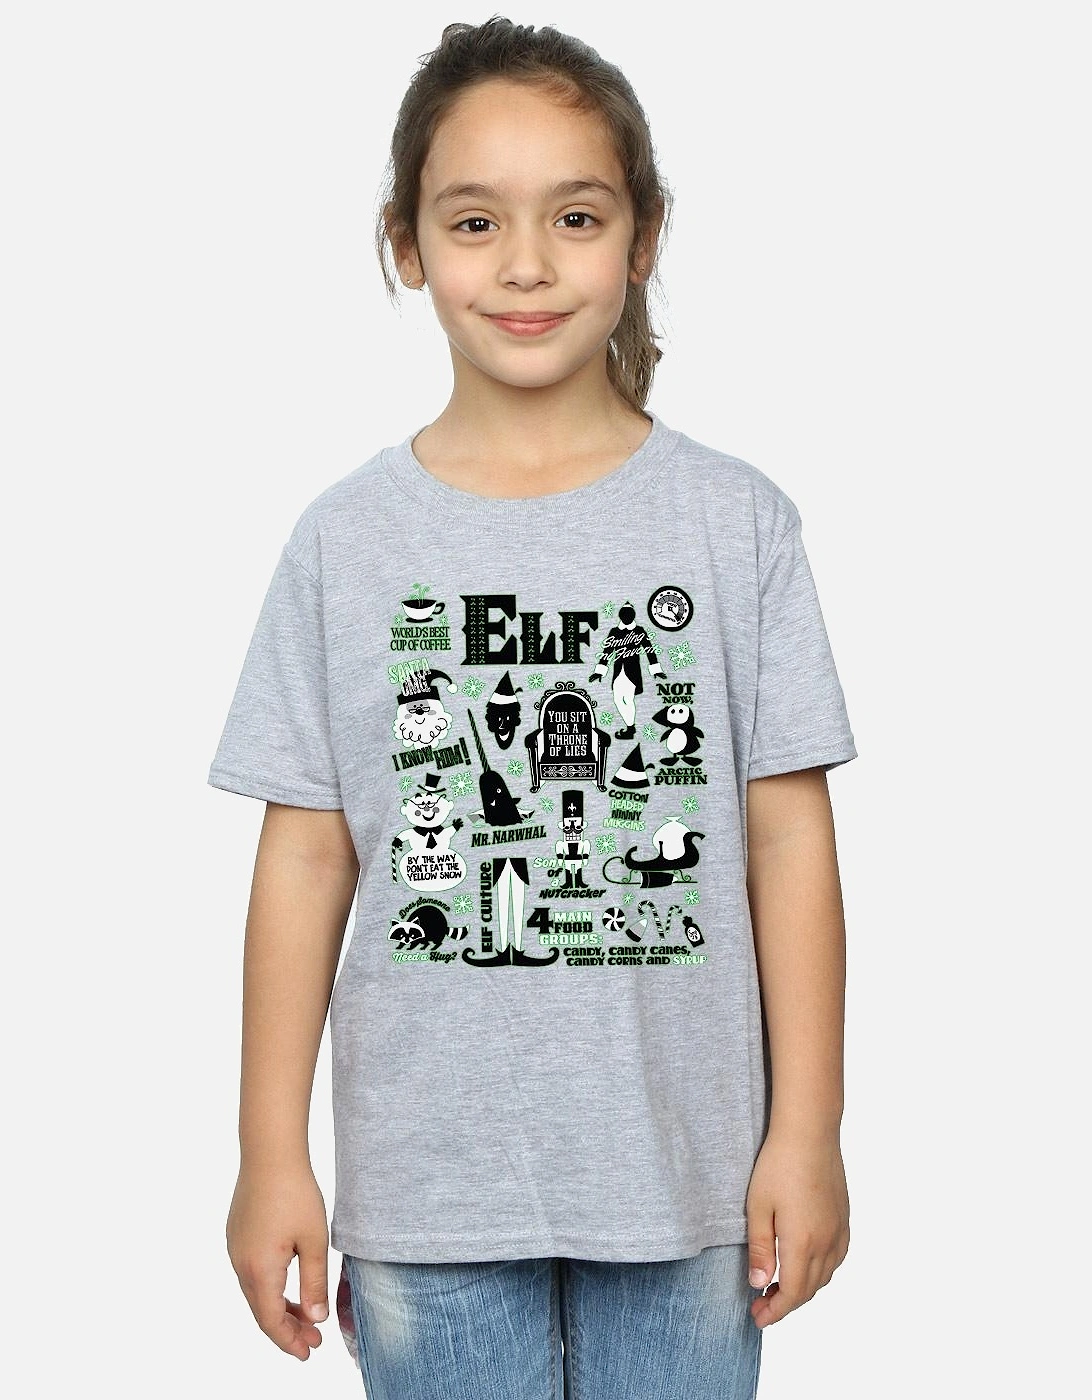 Girls Infographic Poster Cotton T-Shirt